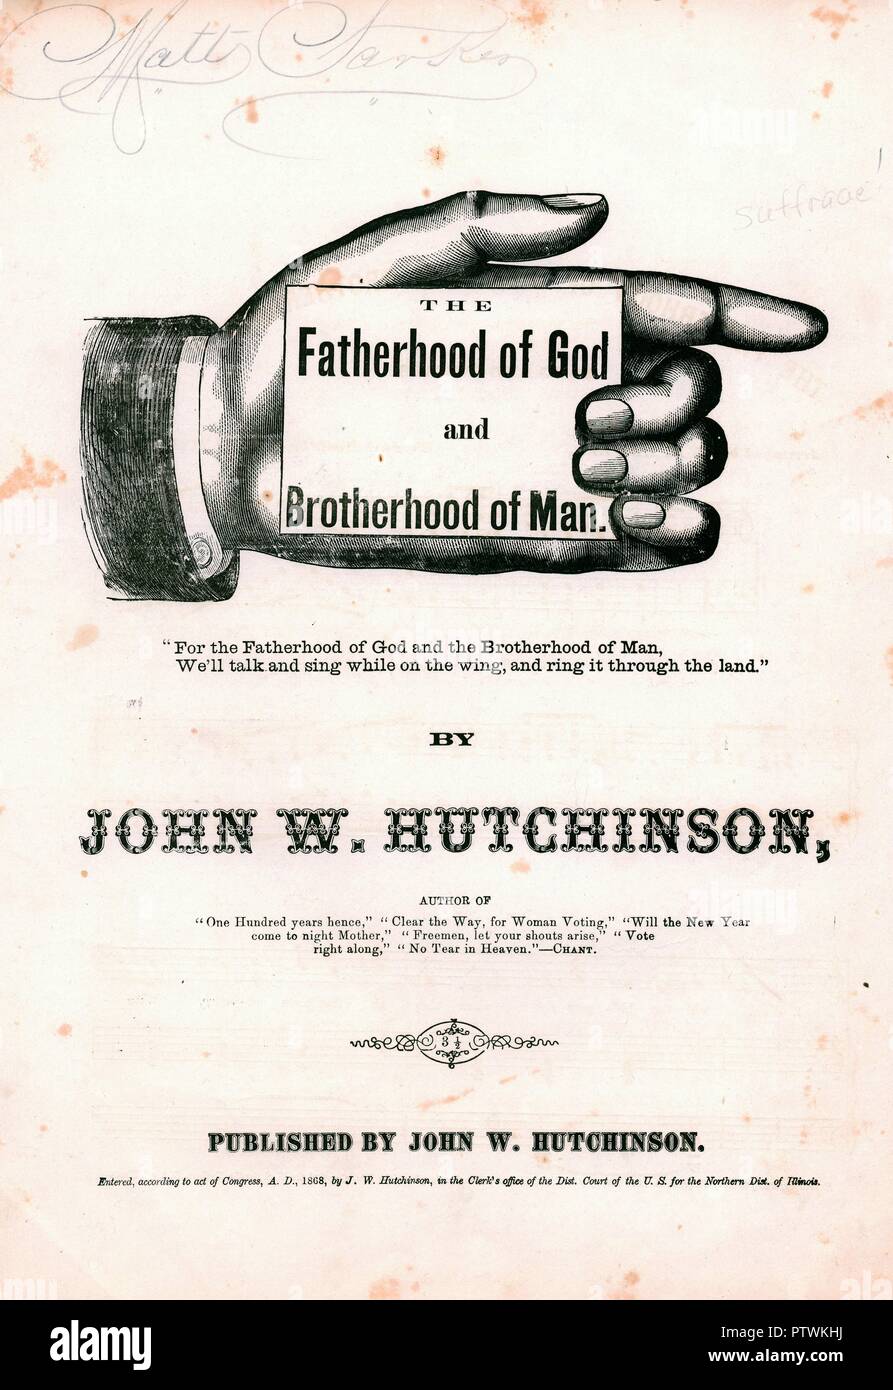 Sheet music cover for the Hutchinson Singers' pro-suffrage song 'The Fatherhood of God and Brotherhood of Man,' with an illustration of a male hand holding a title card, published in Illinois, by John W Hutchinson, for the American market, 1868. () Stock Photo